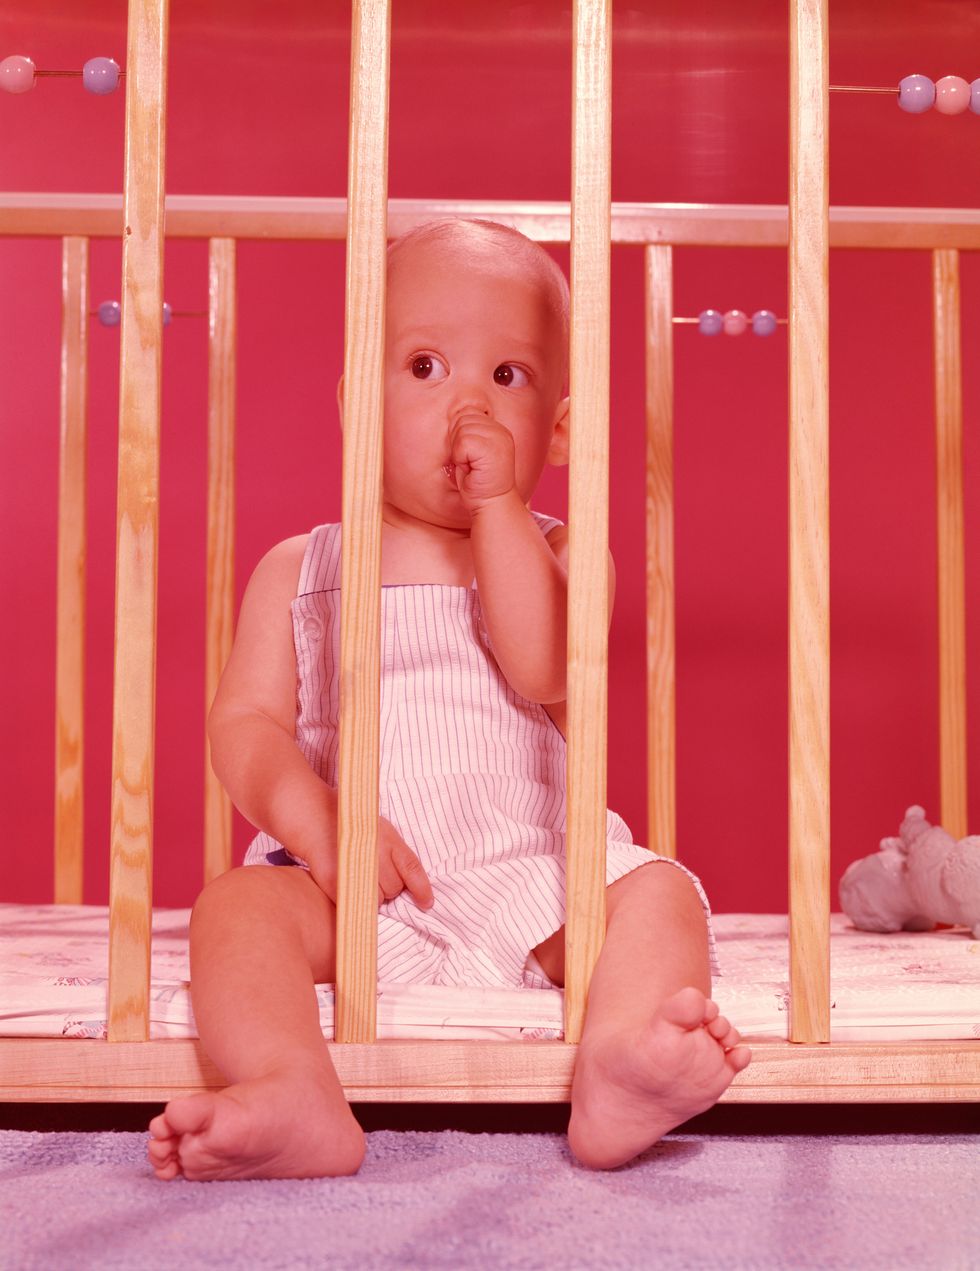 baby in playpen, sucking thumb photo by h armstrong robertsretrofilegetty images